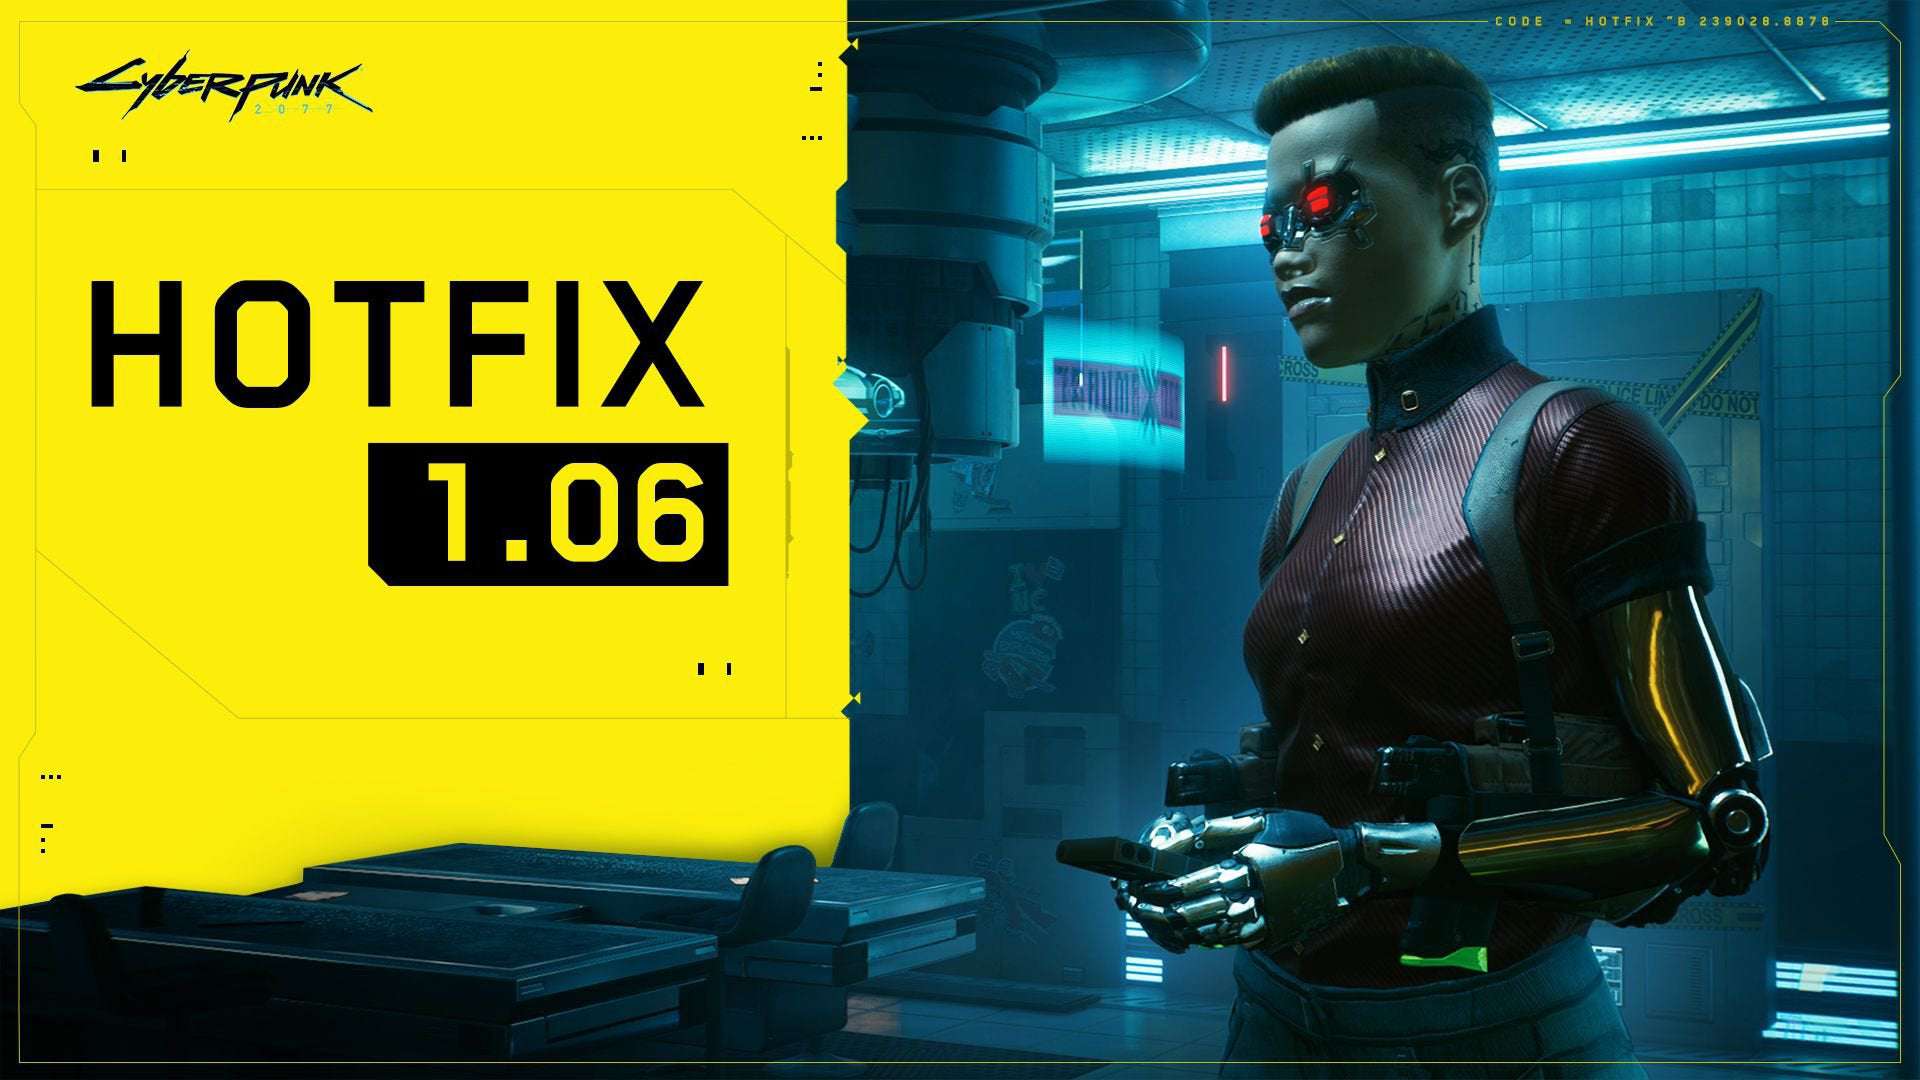 image for Hotfix 1.06 is now available for Cyberpunk 2077